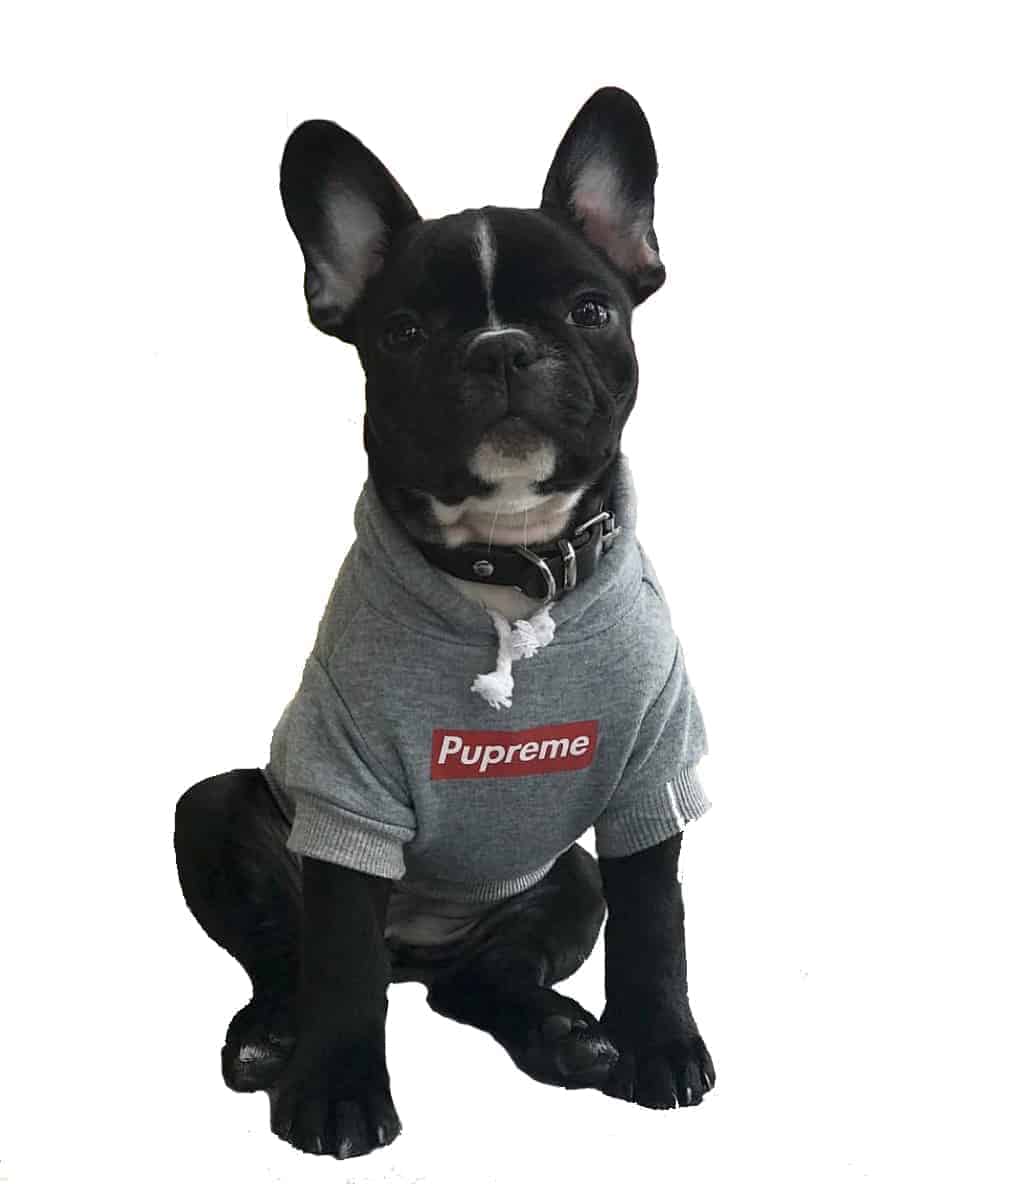 17 Hype Beast Dogs ideas  dogs, dog clothes, designer dog clothes